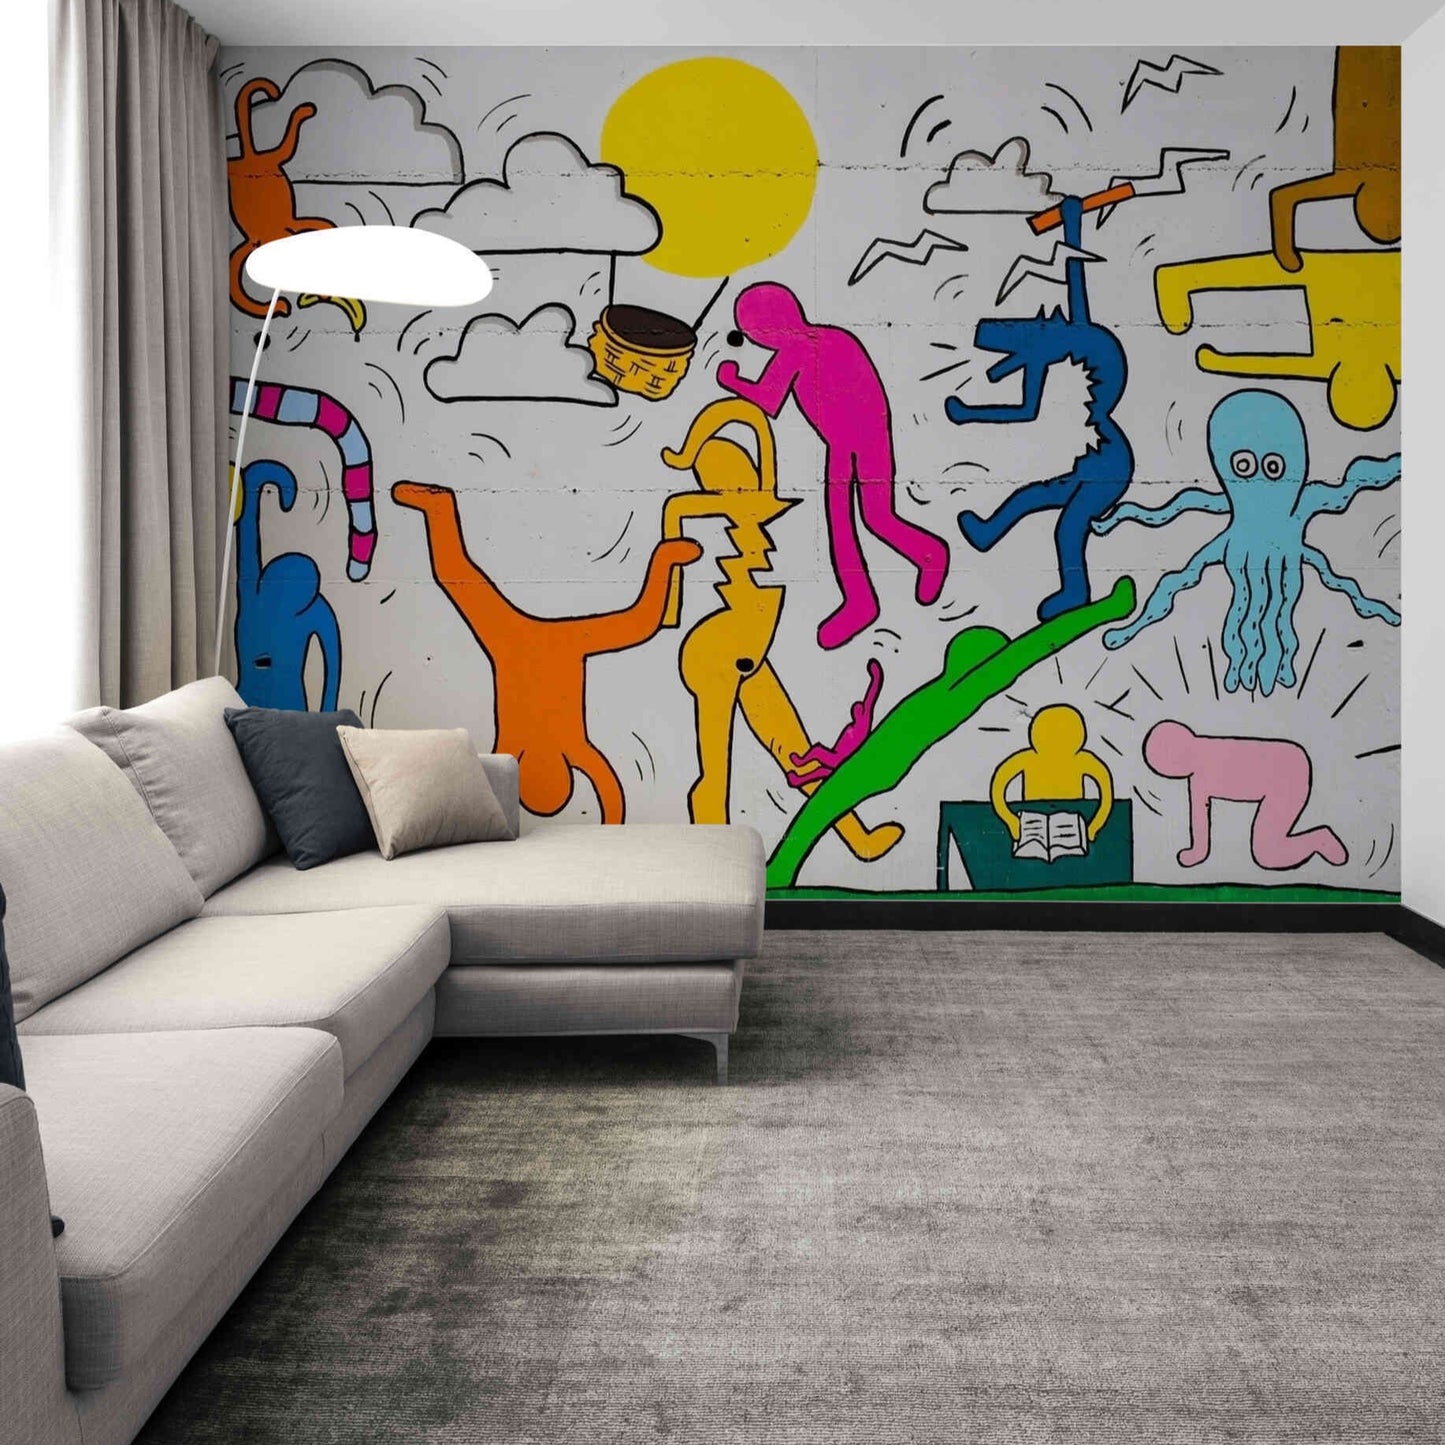 Action-packed scenes from comics come alive with graffiti flair, creating an immersive mural wallpaper.